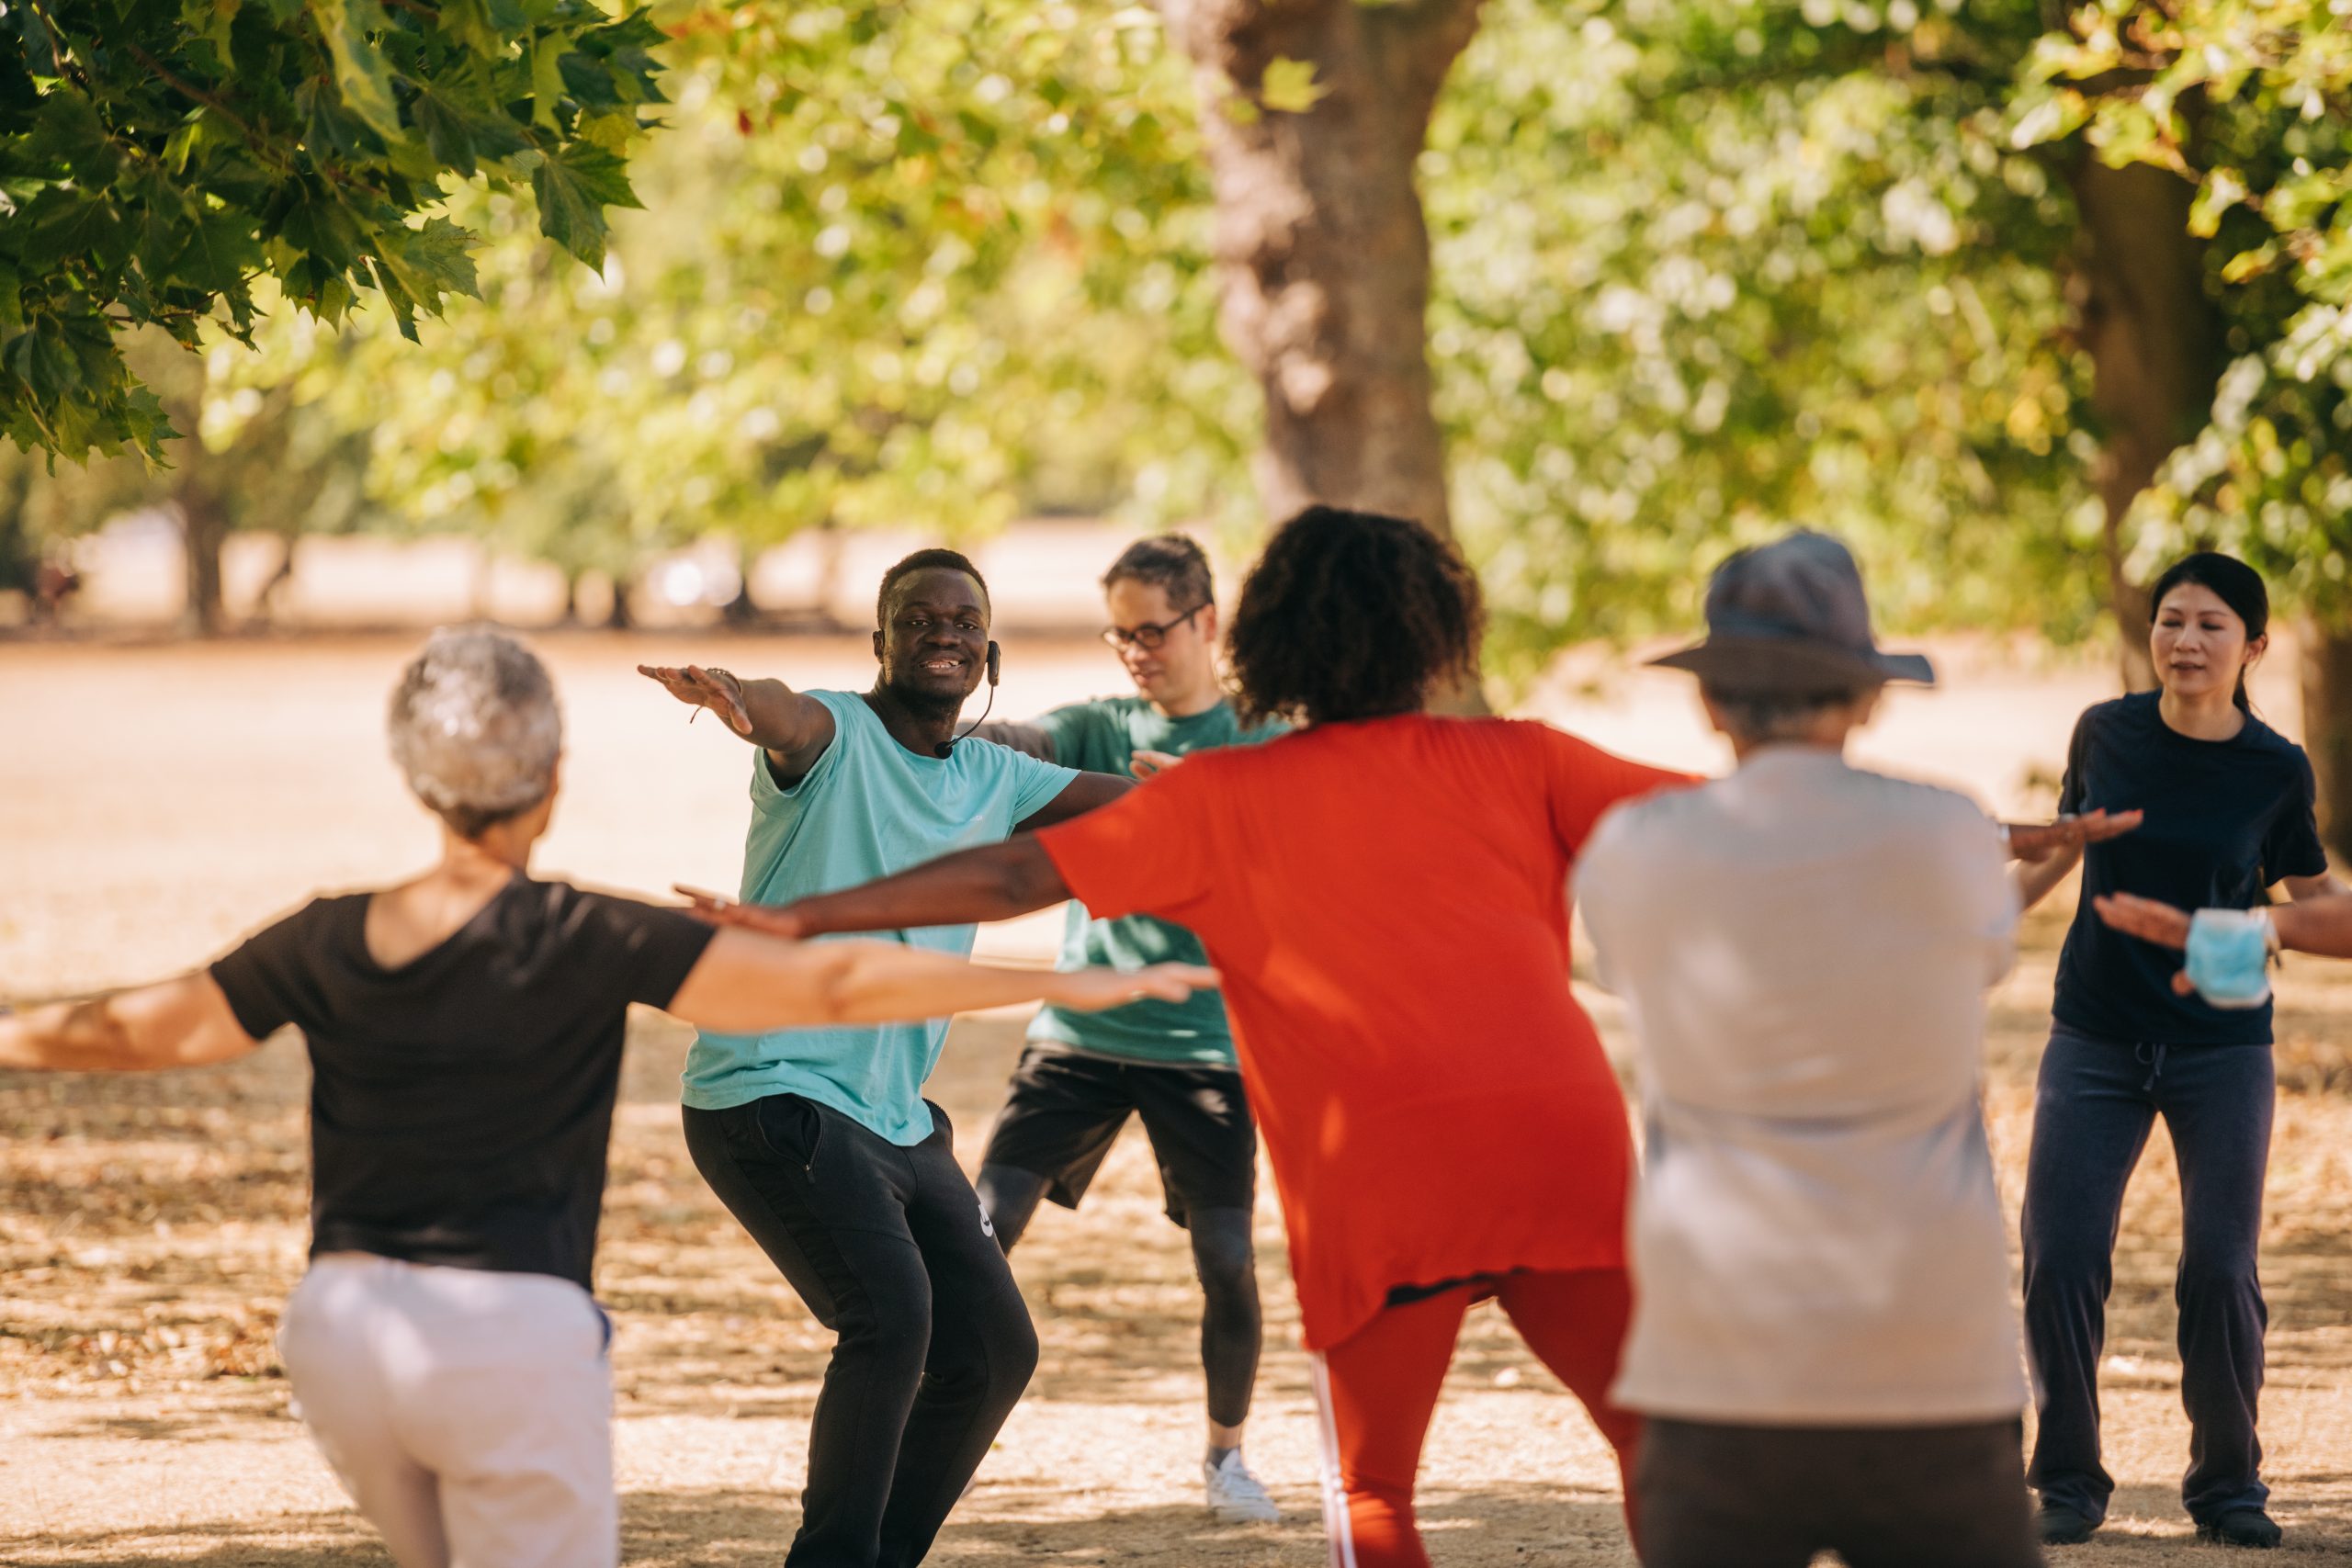 Image of participant dancing in the park. Credit Royal Greenwich Park